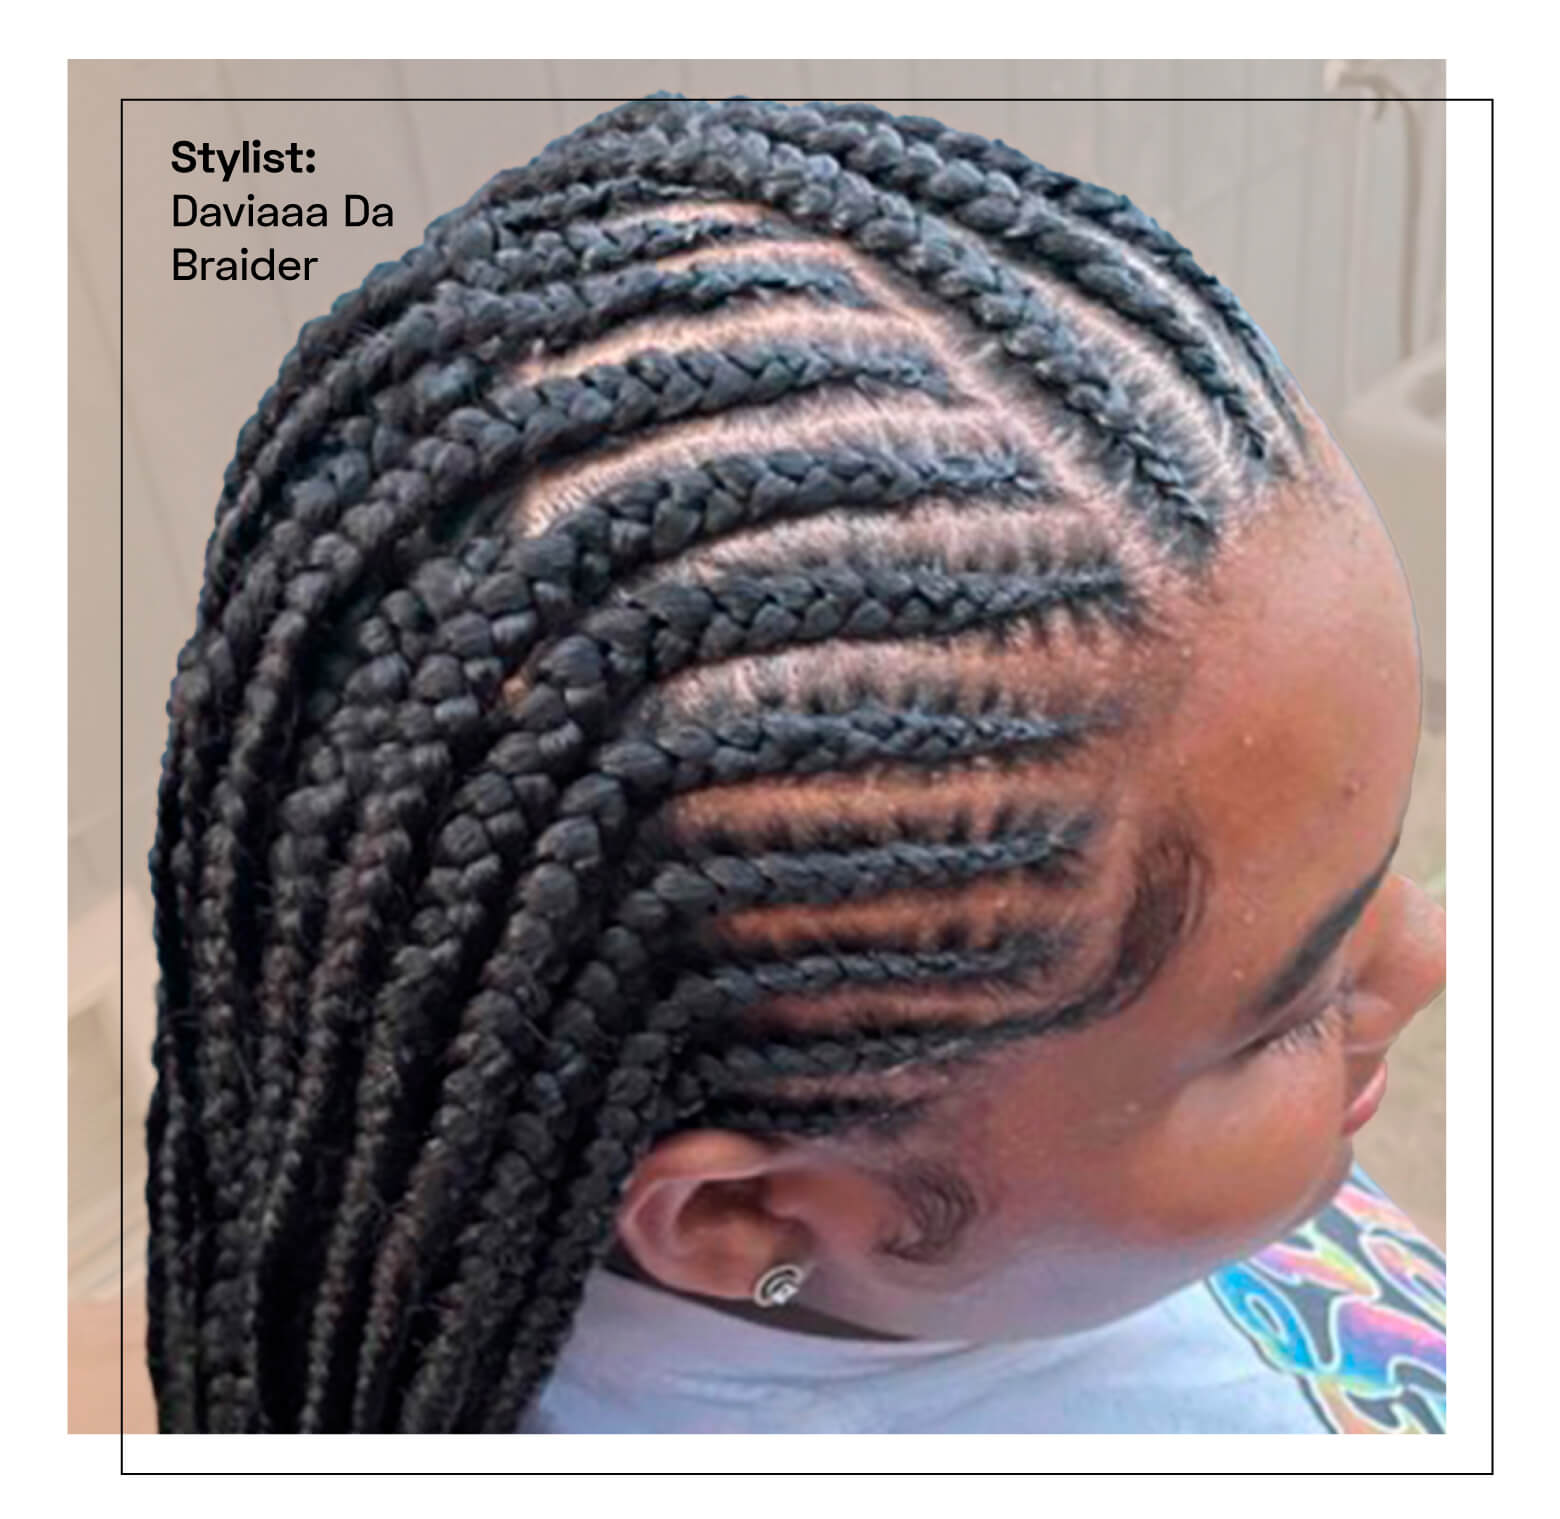 Everything You Need to Know About Getting—and Maintaining—Fulani Braids